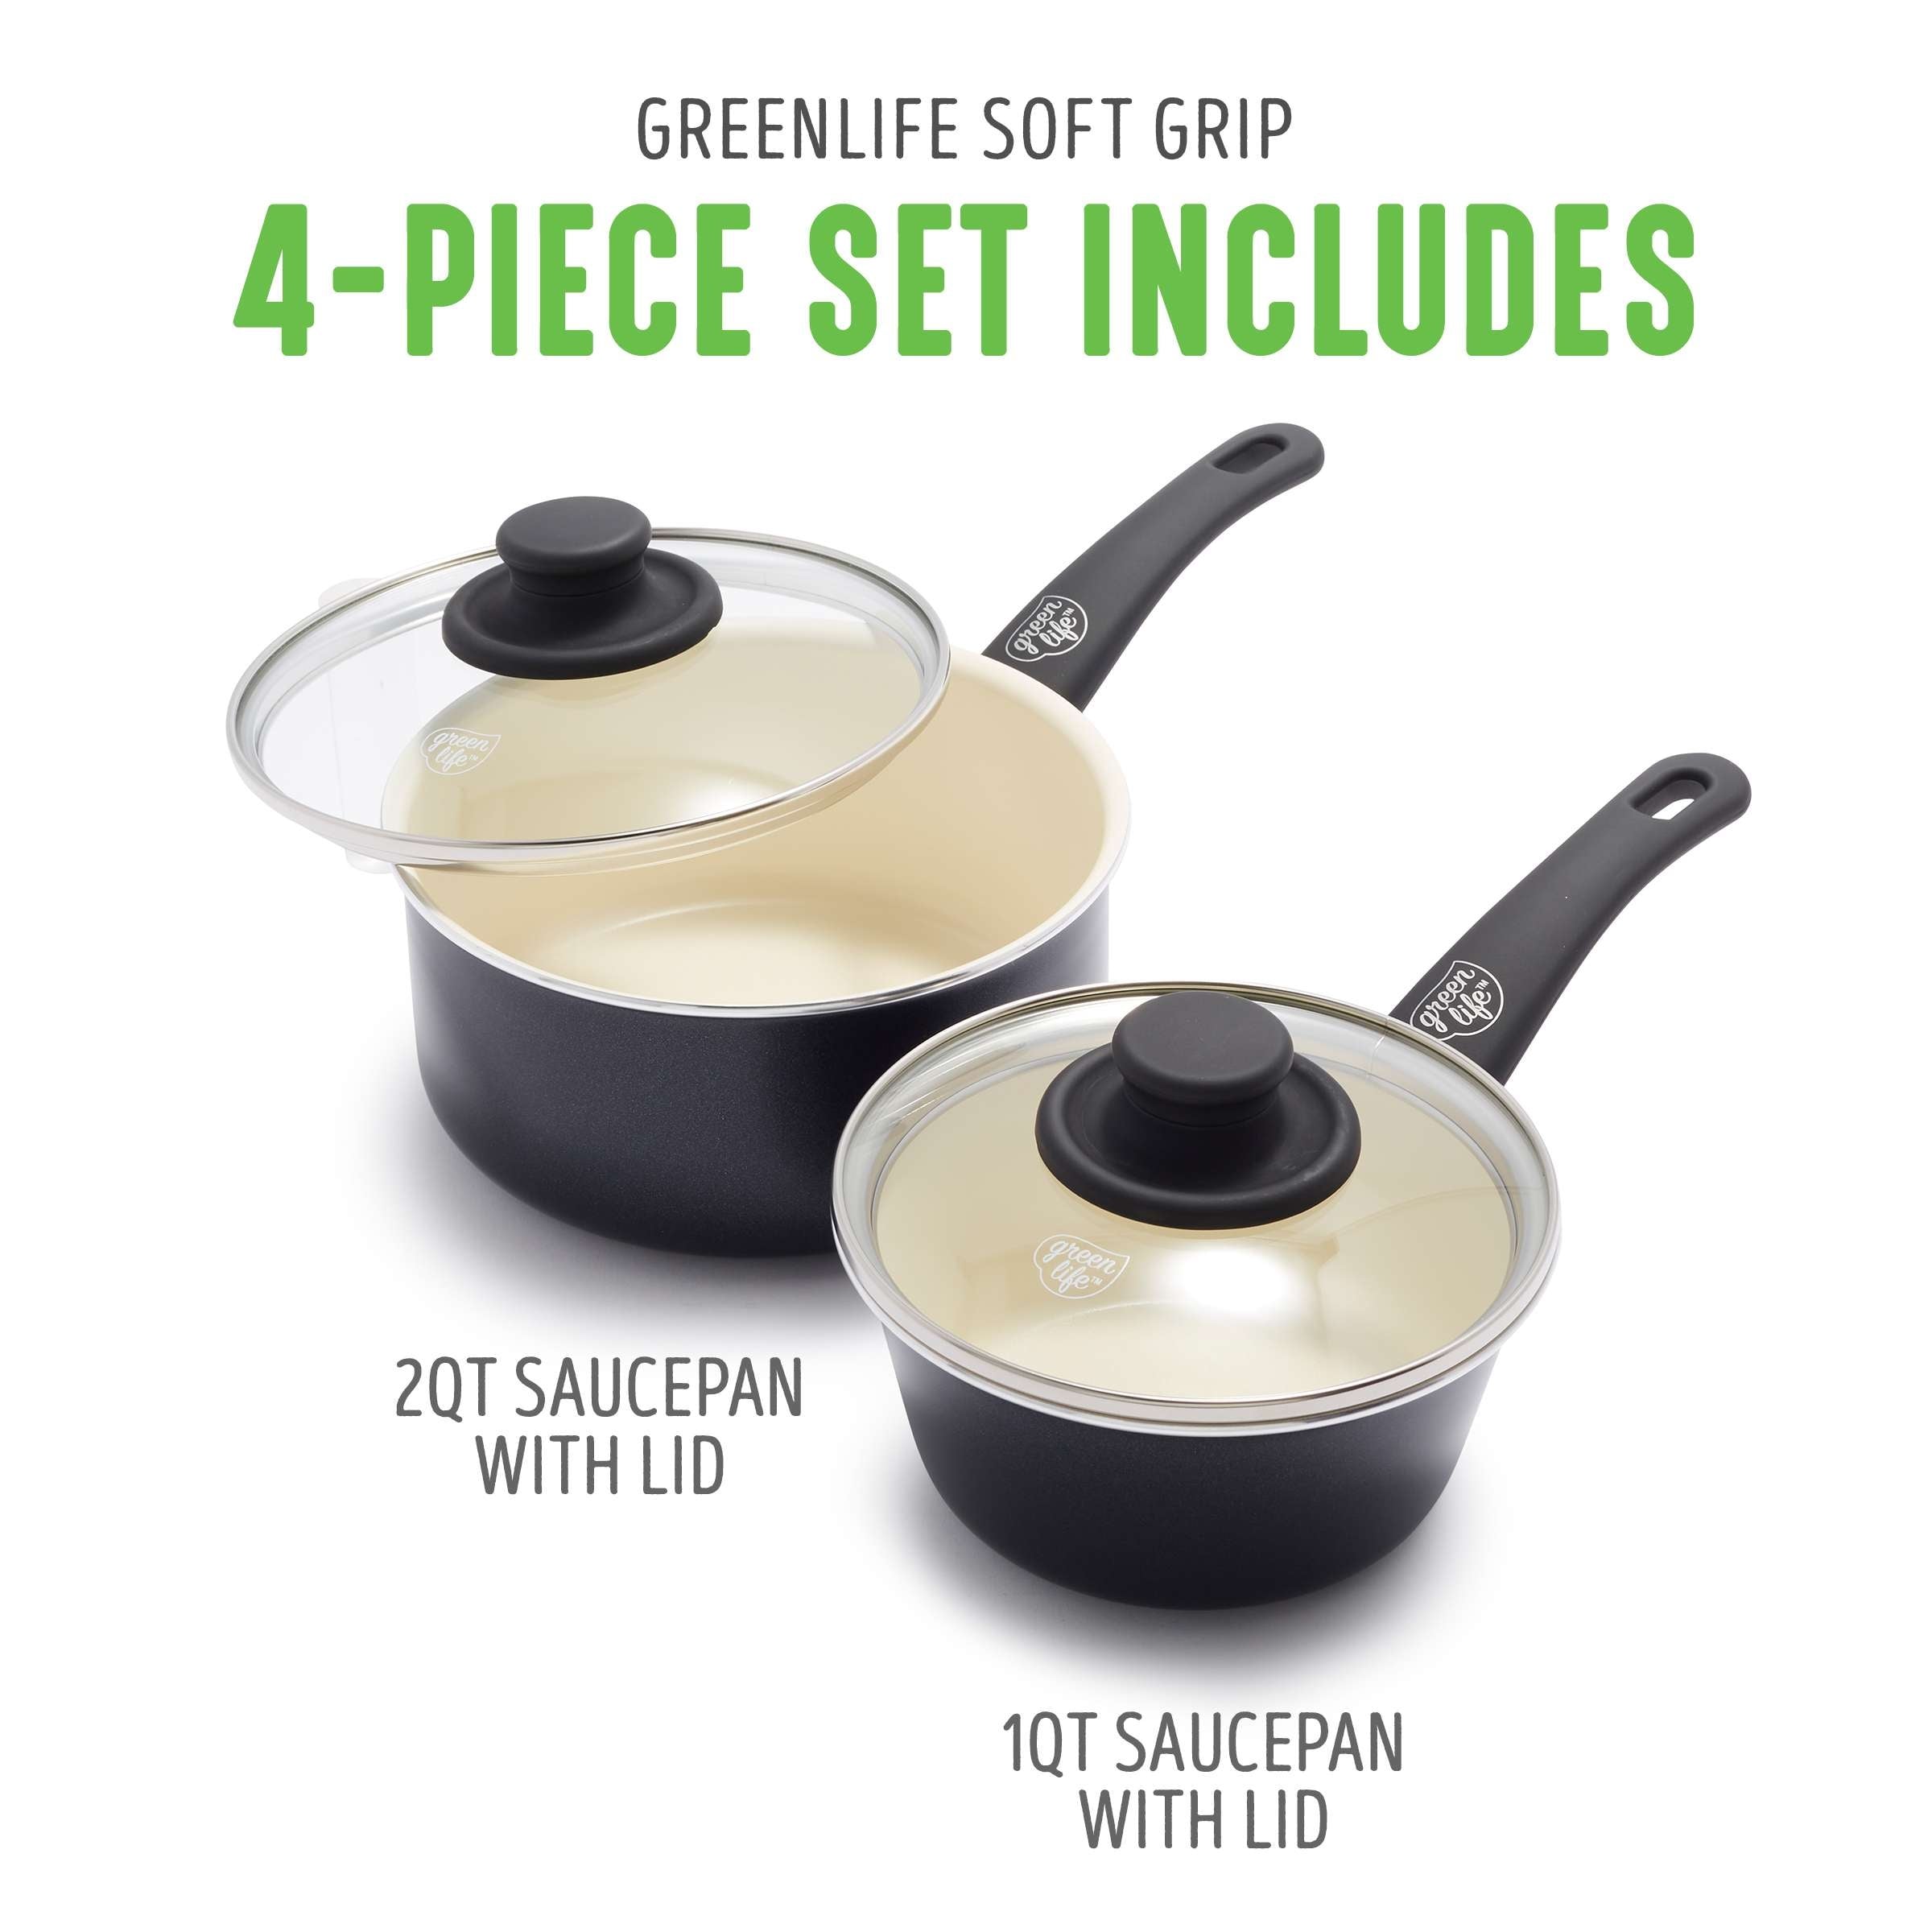  GreenLife Soft Grip Healthy Ceramic Nonstick 16 Piece Kitchen  Cookware Pots and Frying Sauce Pans Set, PFAS-Free, Dishwasher Safe, Black  and Cream: Home & Kitchen